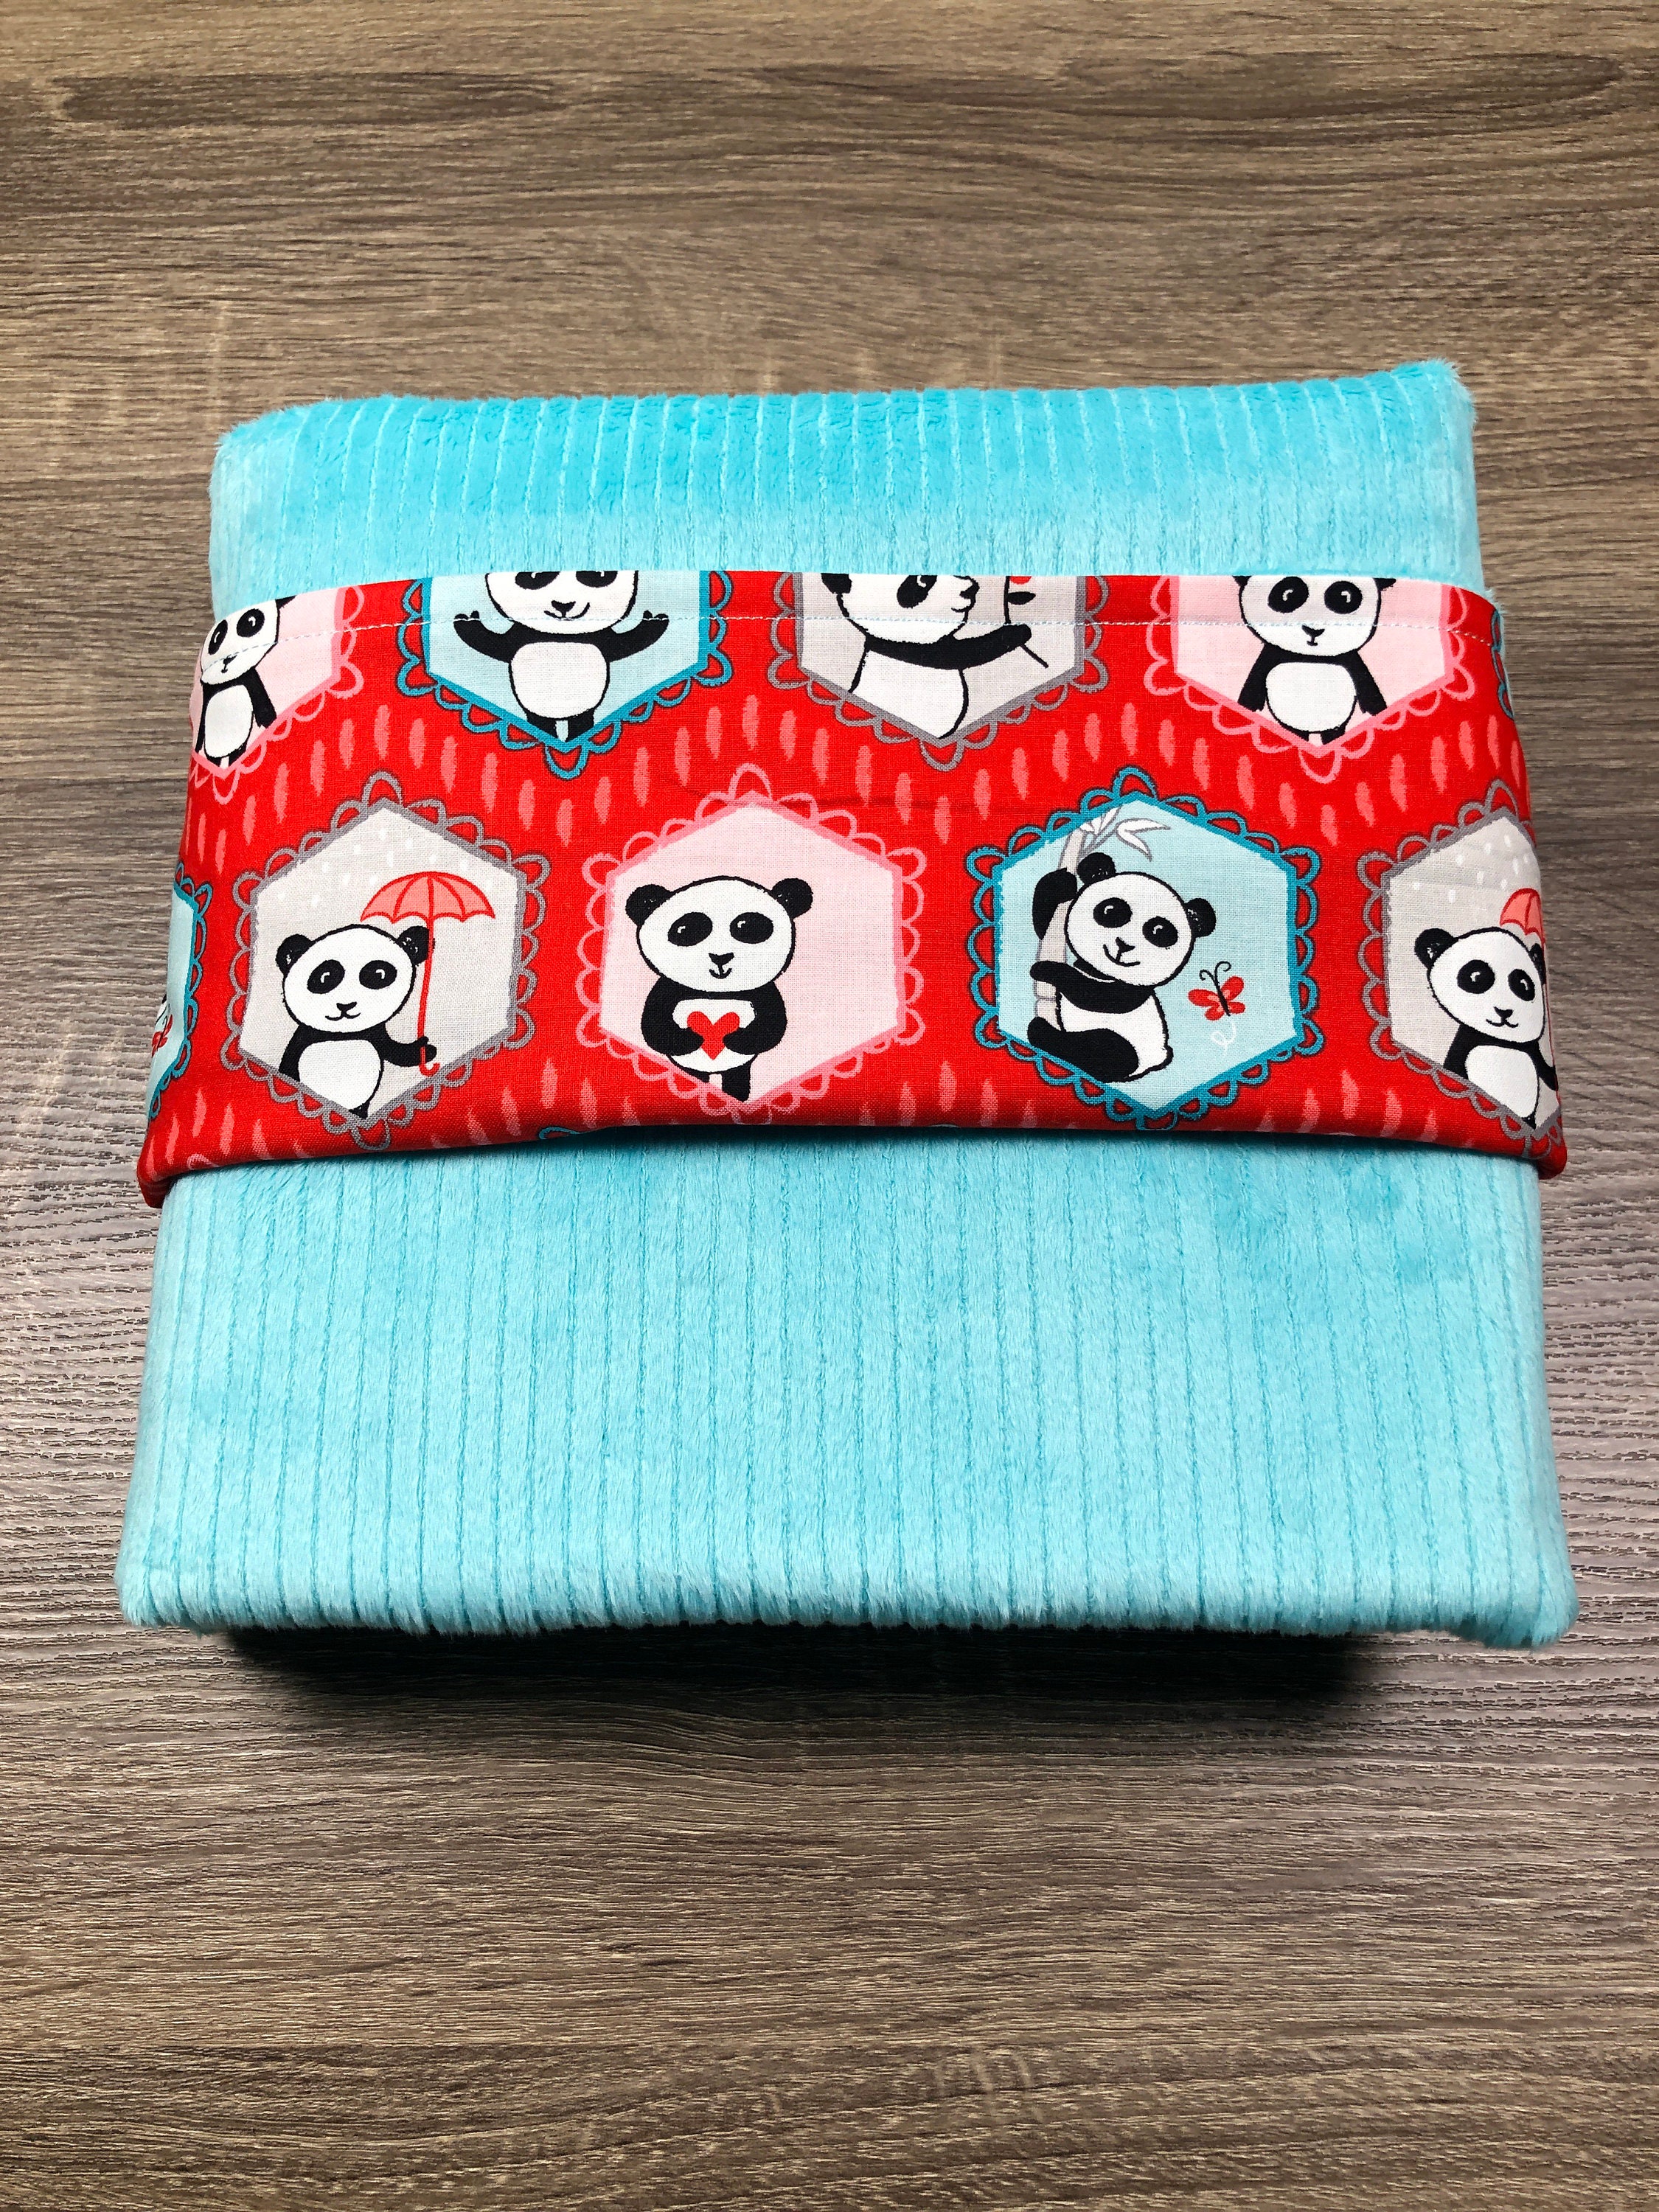 12 Pound Weighted Blanket, Panda Weighted Blanket, Red ,Aqua Weighted